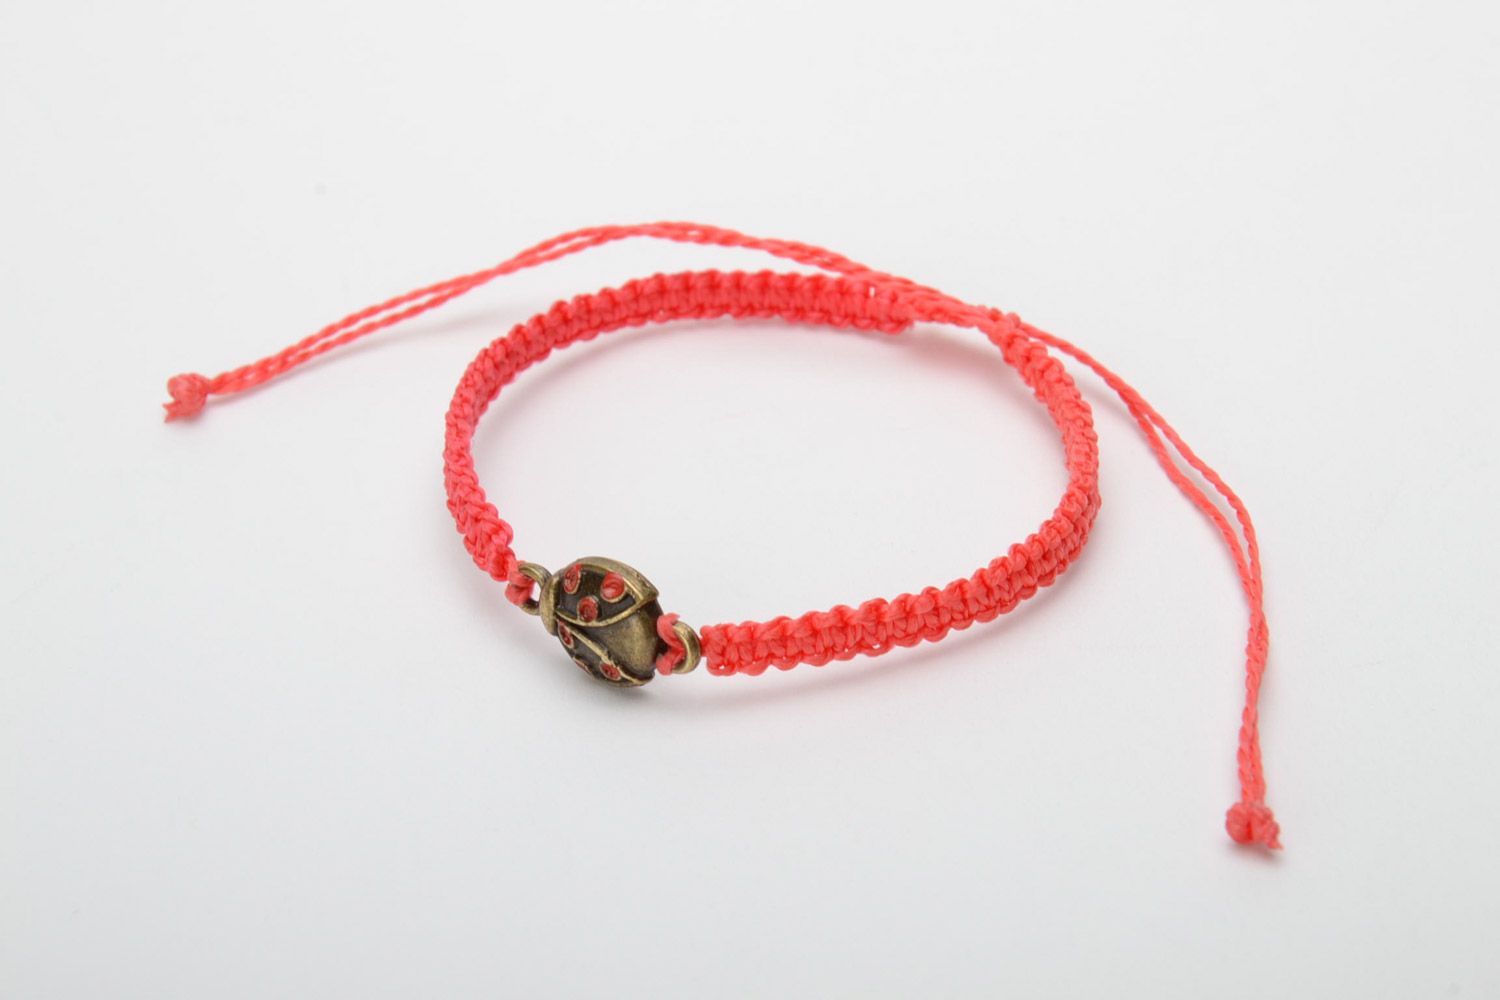 Handmade women's macrame woven cord bracelet of red color with charm photo 3